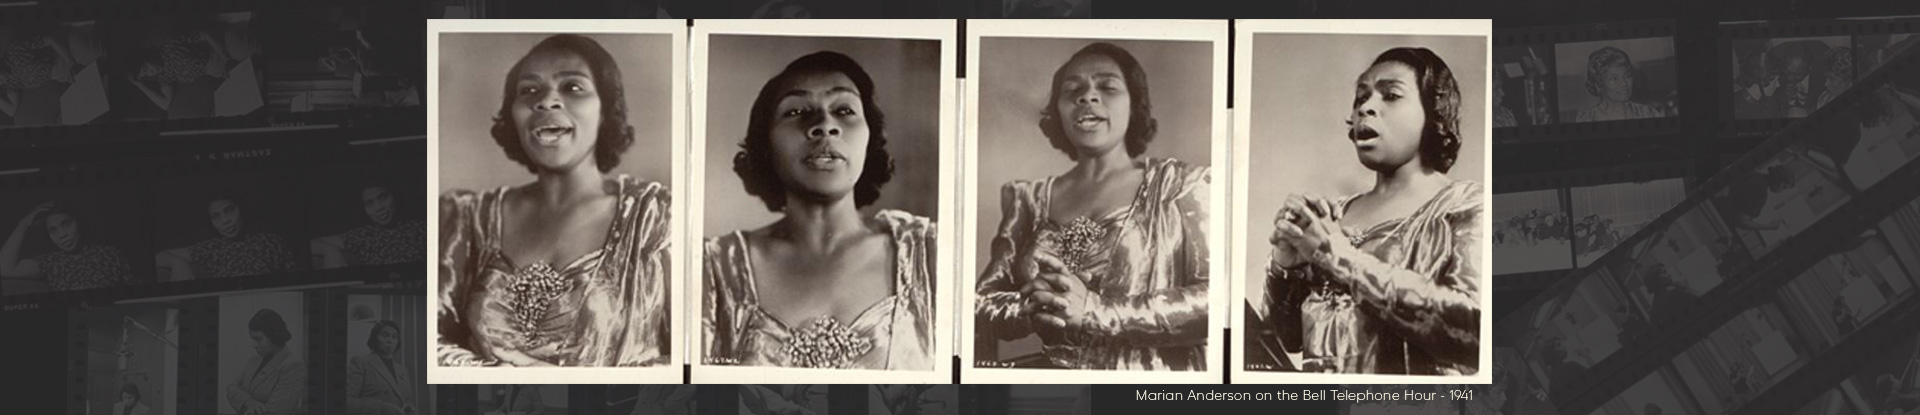 Marian Anderson on the Bell Telephone Hour with a compilation of images in the background